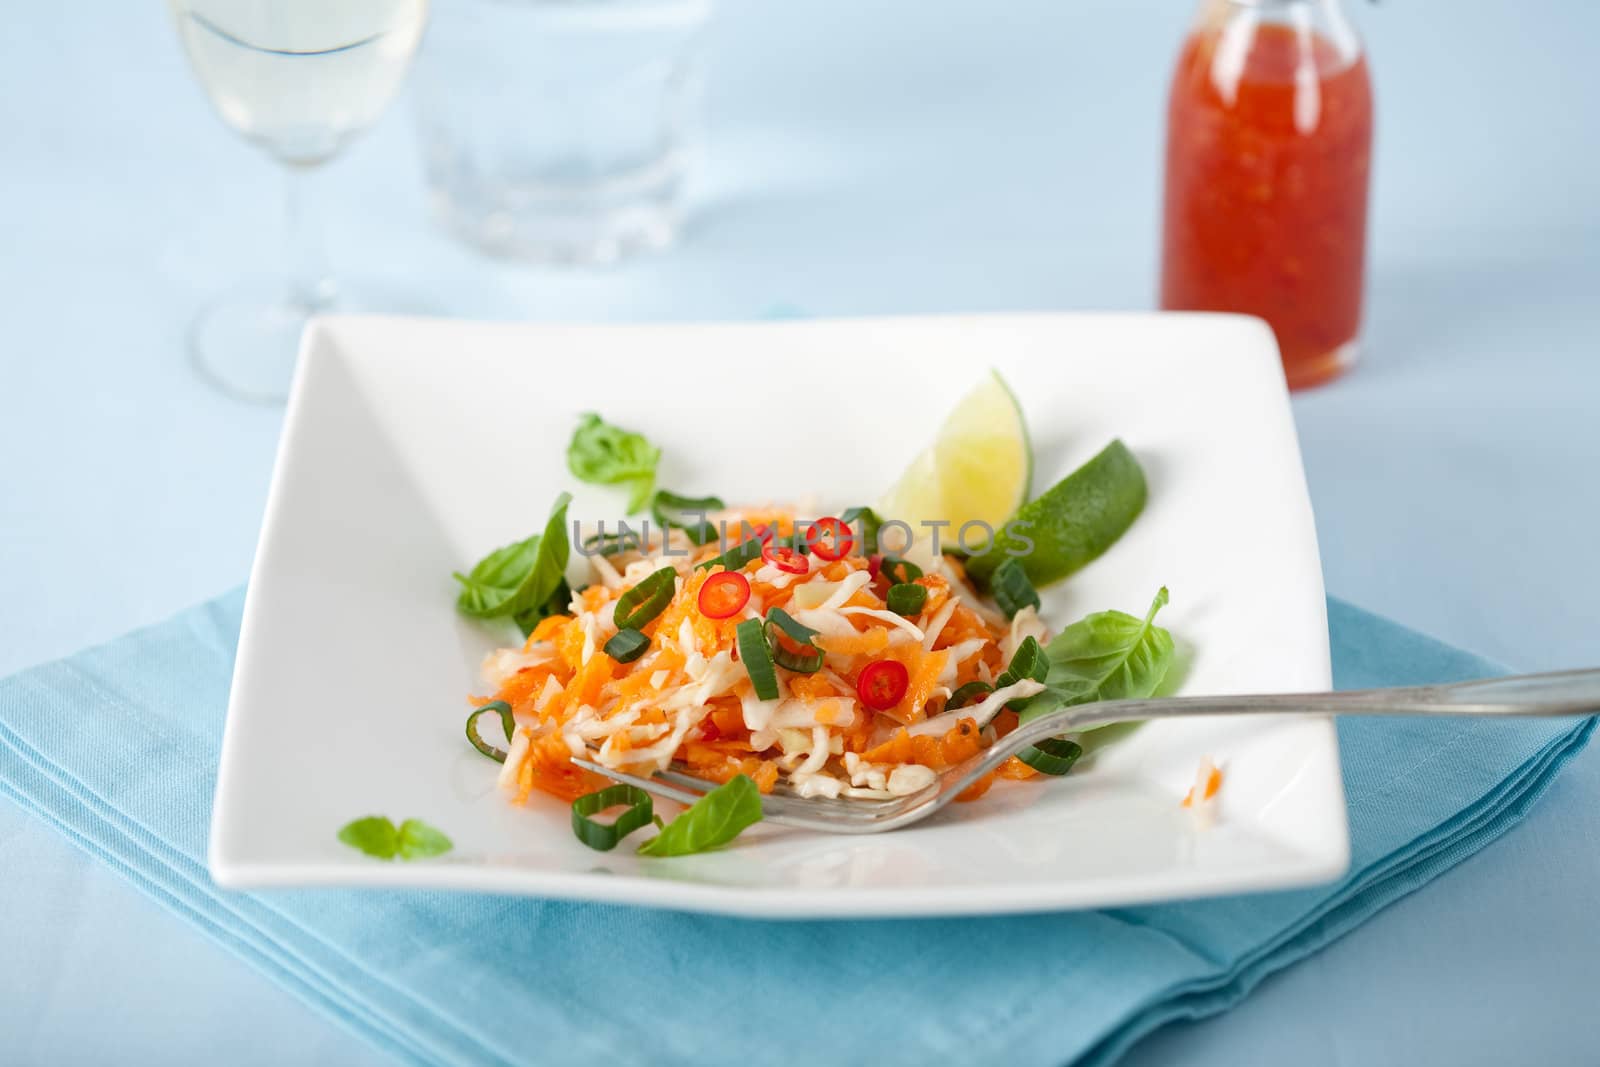 Delicious carrot salad with cabbage, lime, chile and spring onions